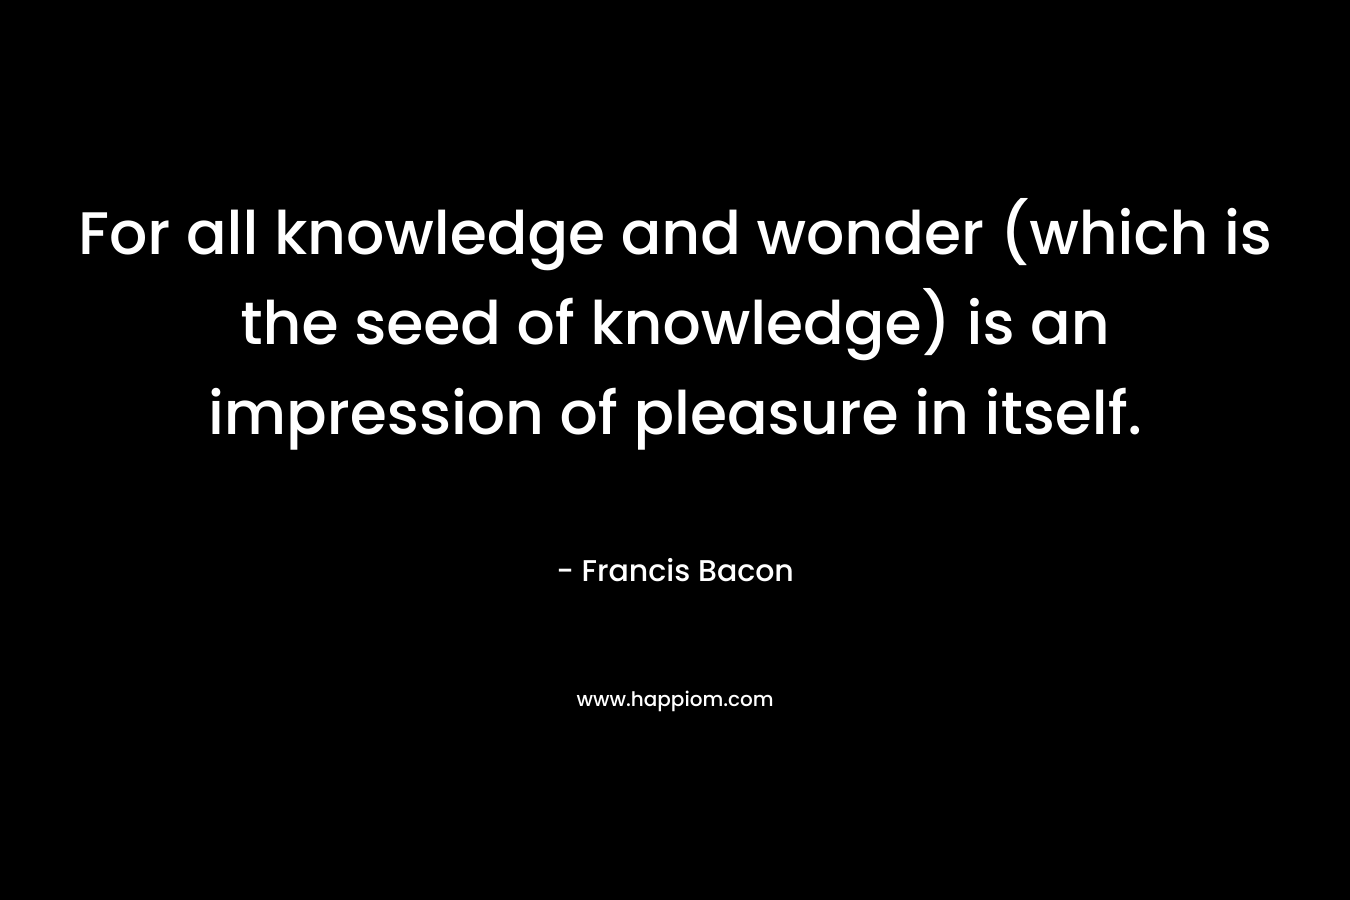 For all knowledge and wonder (which is the seed of knowledge) is an impression of pleasure in itself. – Francis Bacon